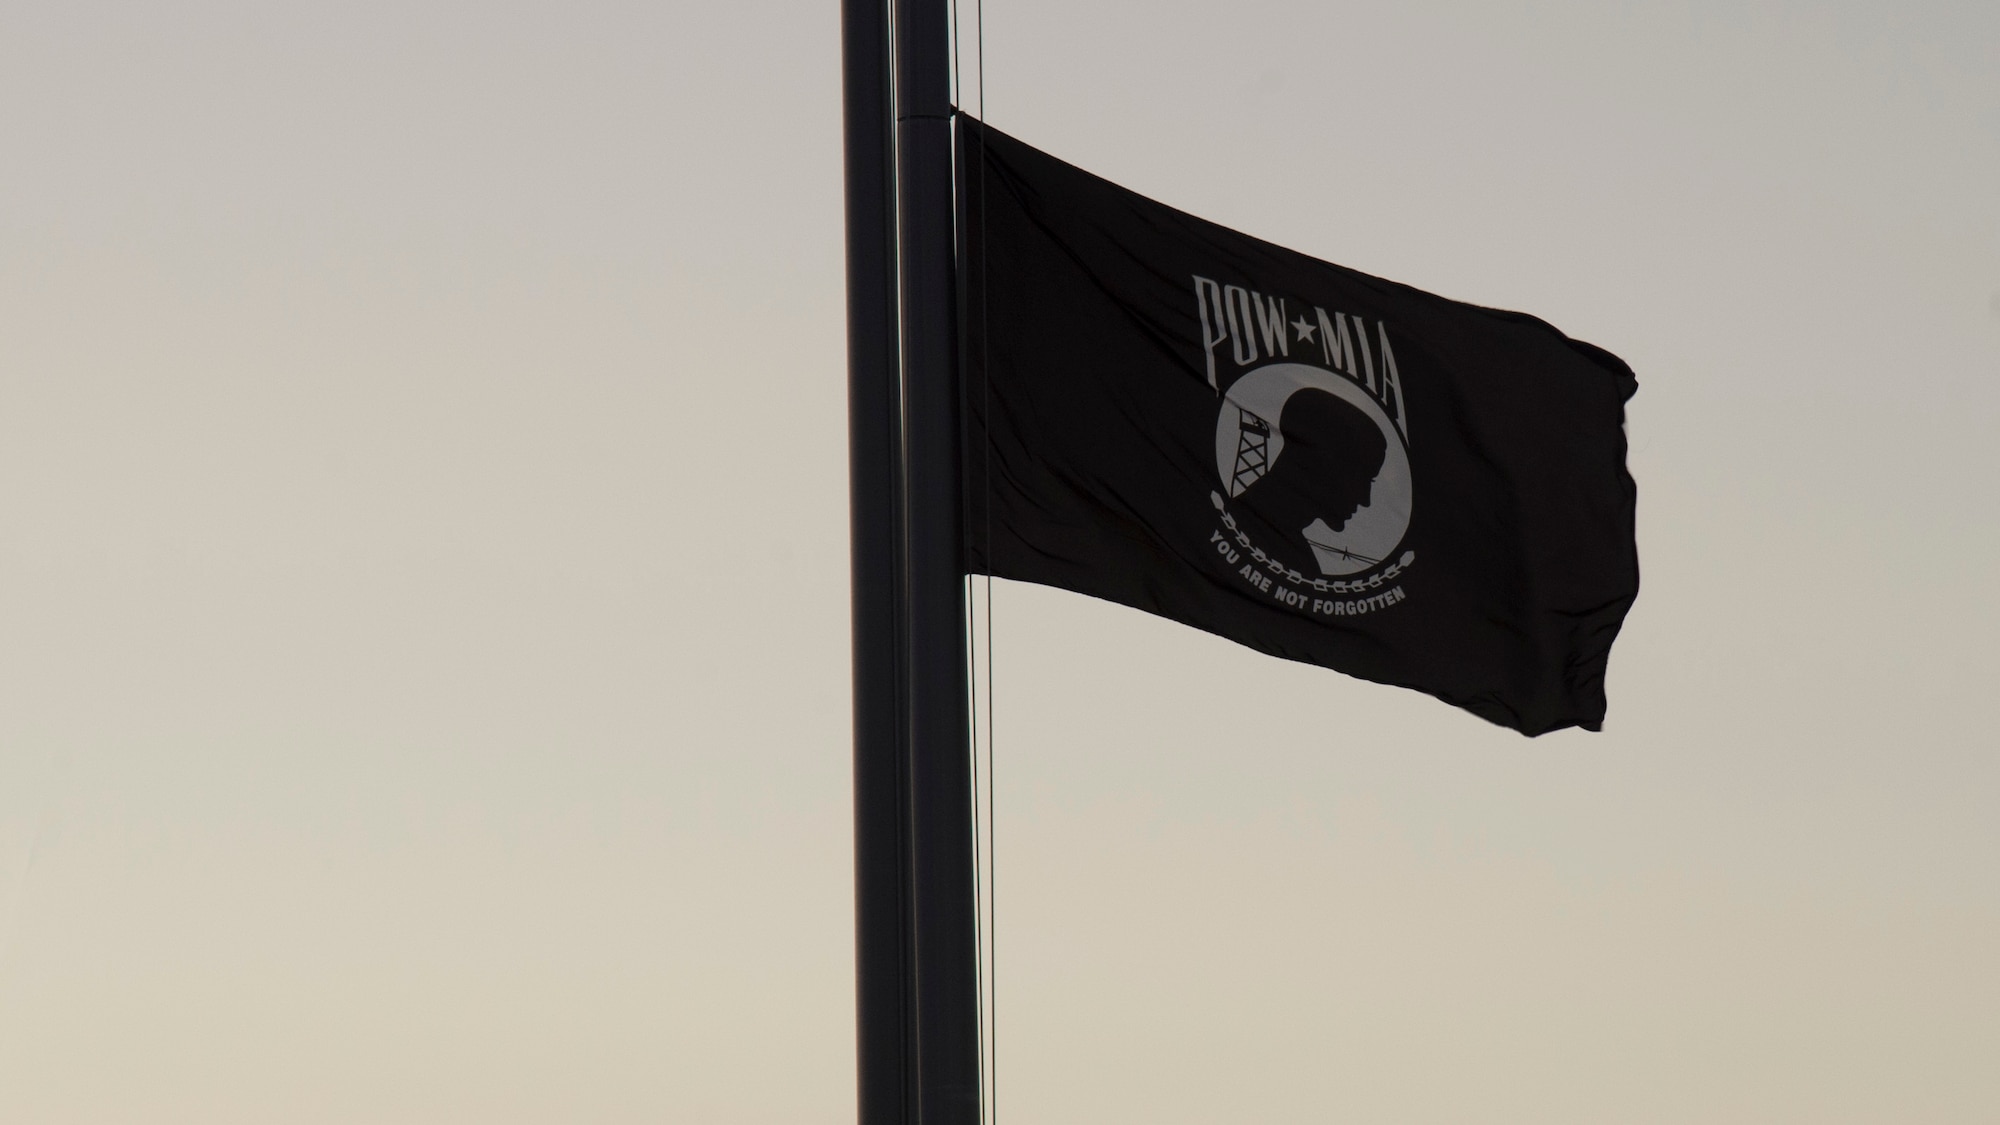 The POW/ MIA Flag waves over MacDill Air Force Base, Sept. 20, 2019. POW/MIA Recognition Day is commemorated nationally on the third Friday of every September in honor of service members who were prisoners of war as well as those missing in action. (U.S. Air Force photo by Airman 1st Class Shannon Bowman)